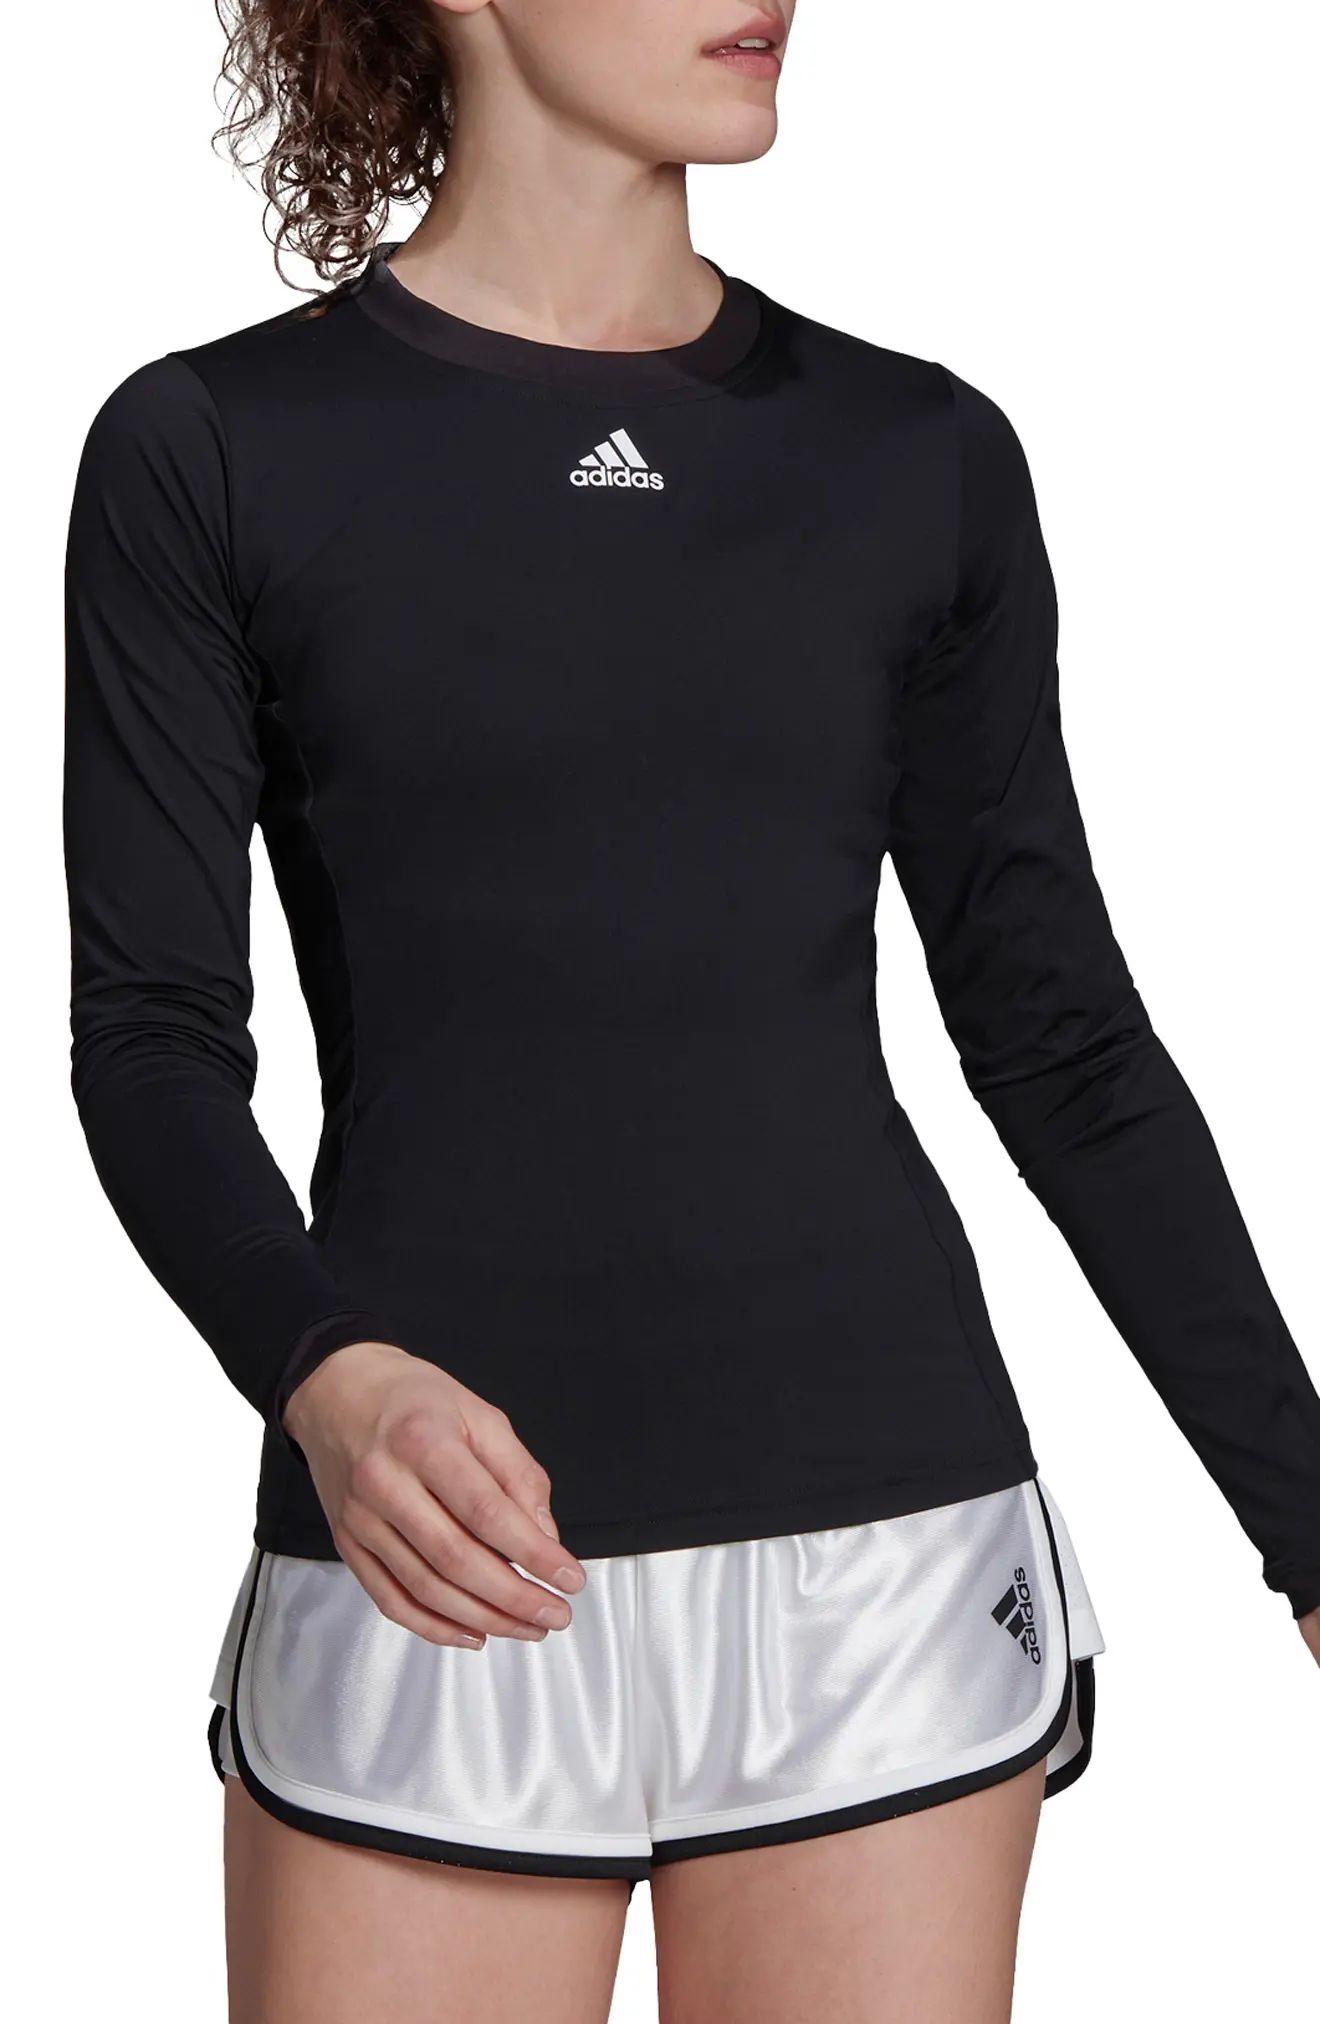 adidas Tennis Freelift Long Sleeve Tee in Black/White at Nordstrom, Size Small | Nordstrom